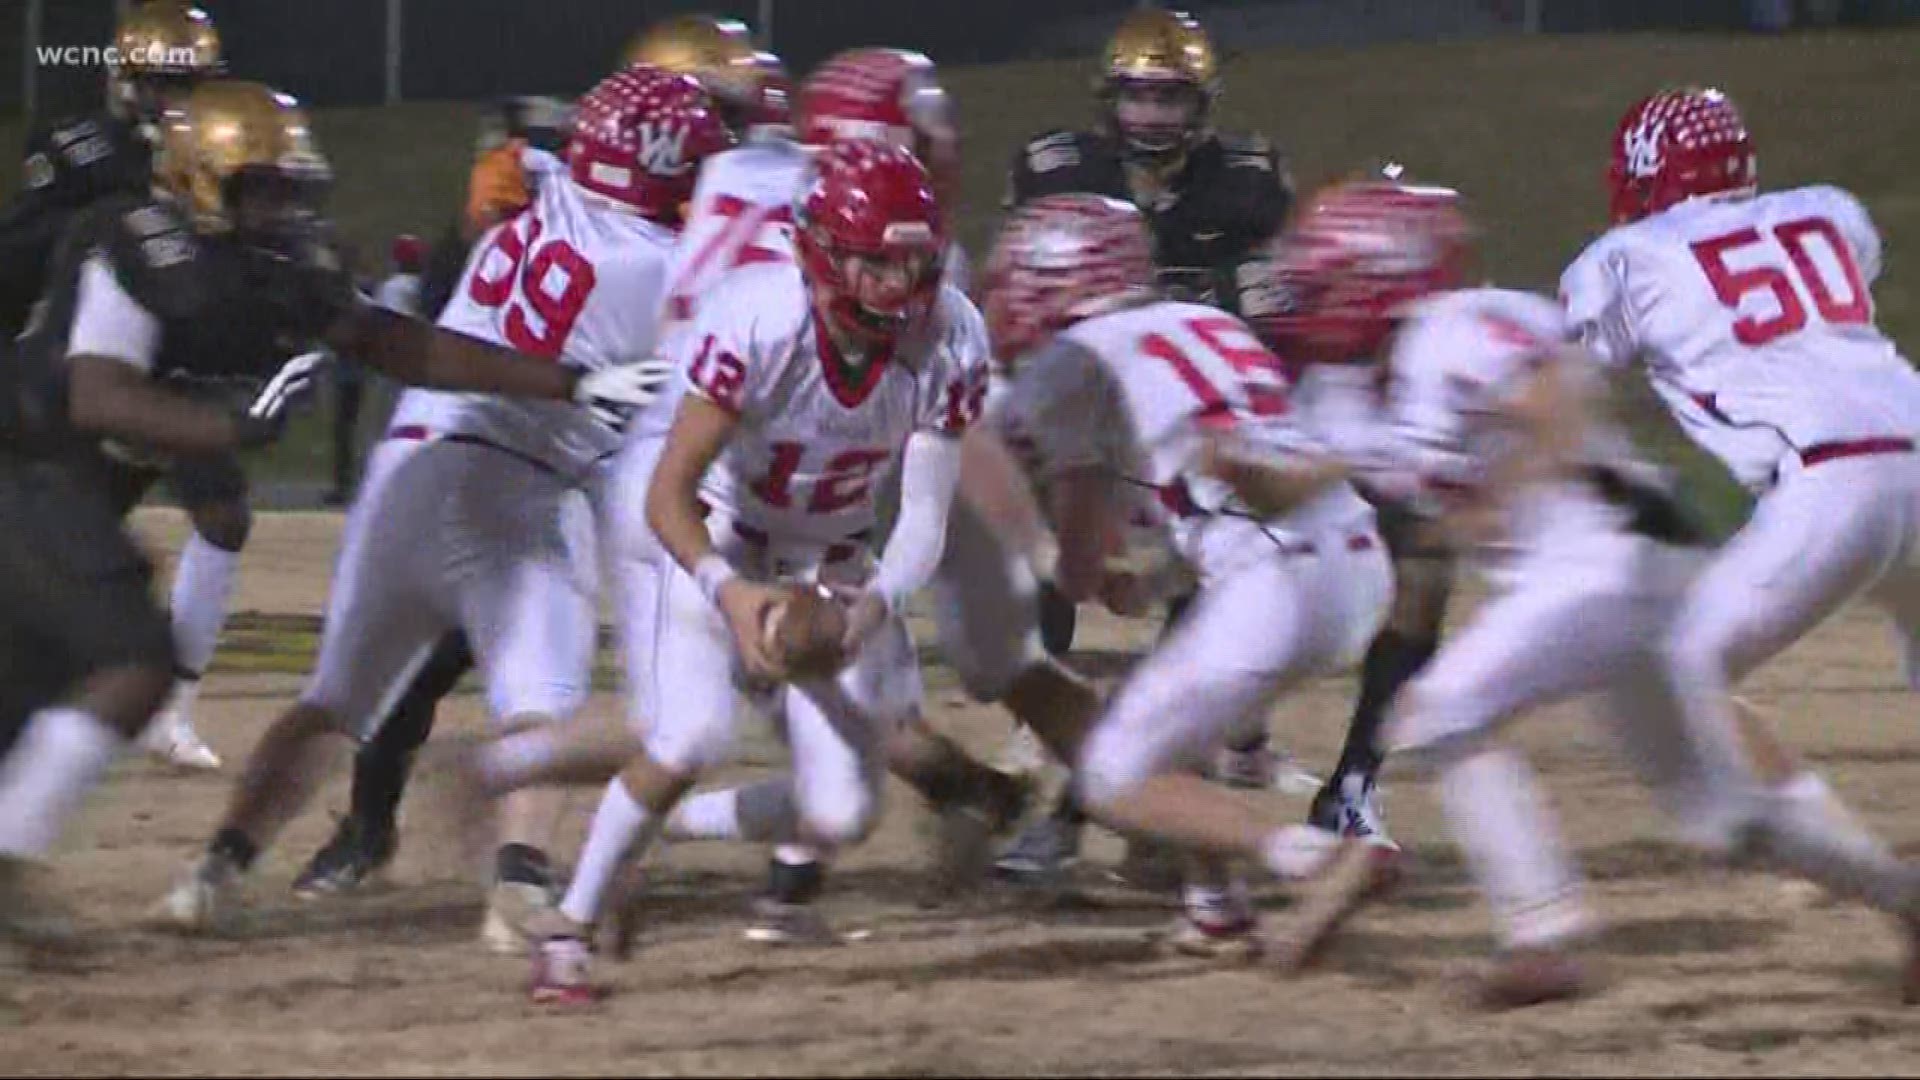 Shelby hosted West Lincoln Friday night. Shelby wins, 42-7.